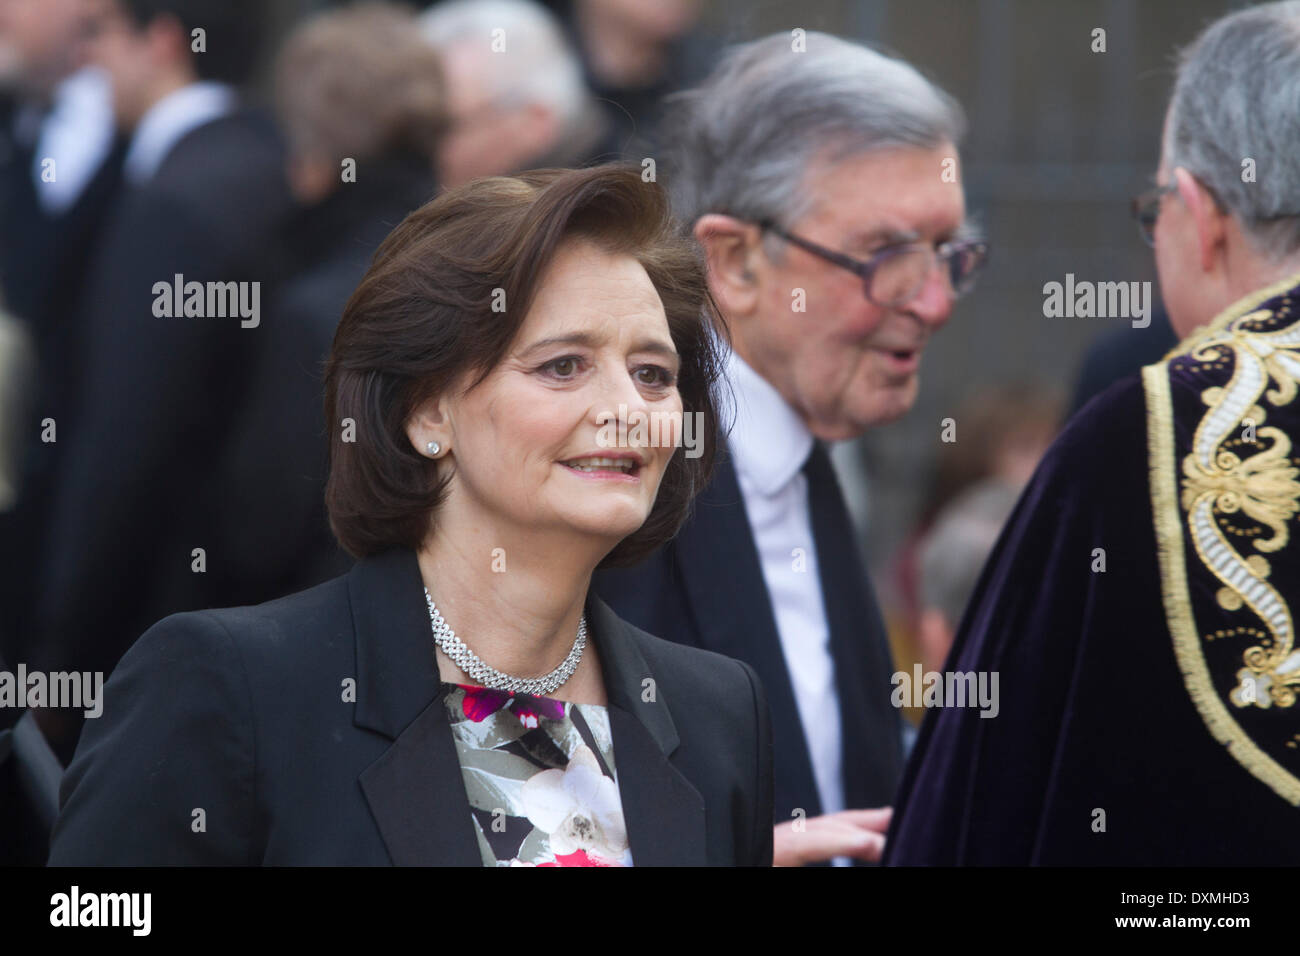 Westminster London, UK. 27th March 2014. Cherie Blair QC wife of former British Prime Minister Tony Blair as one of many guests and dignitaries attending the funeral service of former Labour MP Tony Benn at St Margaret's Church in Westminster Stock Photo